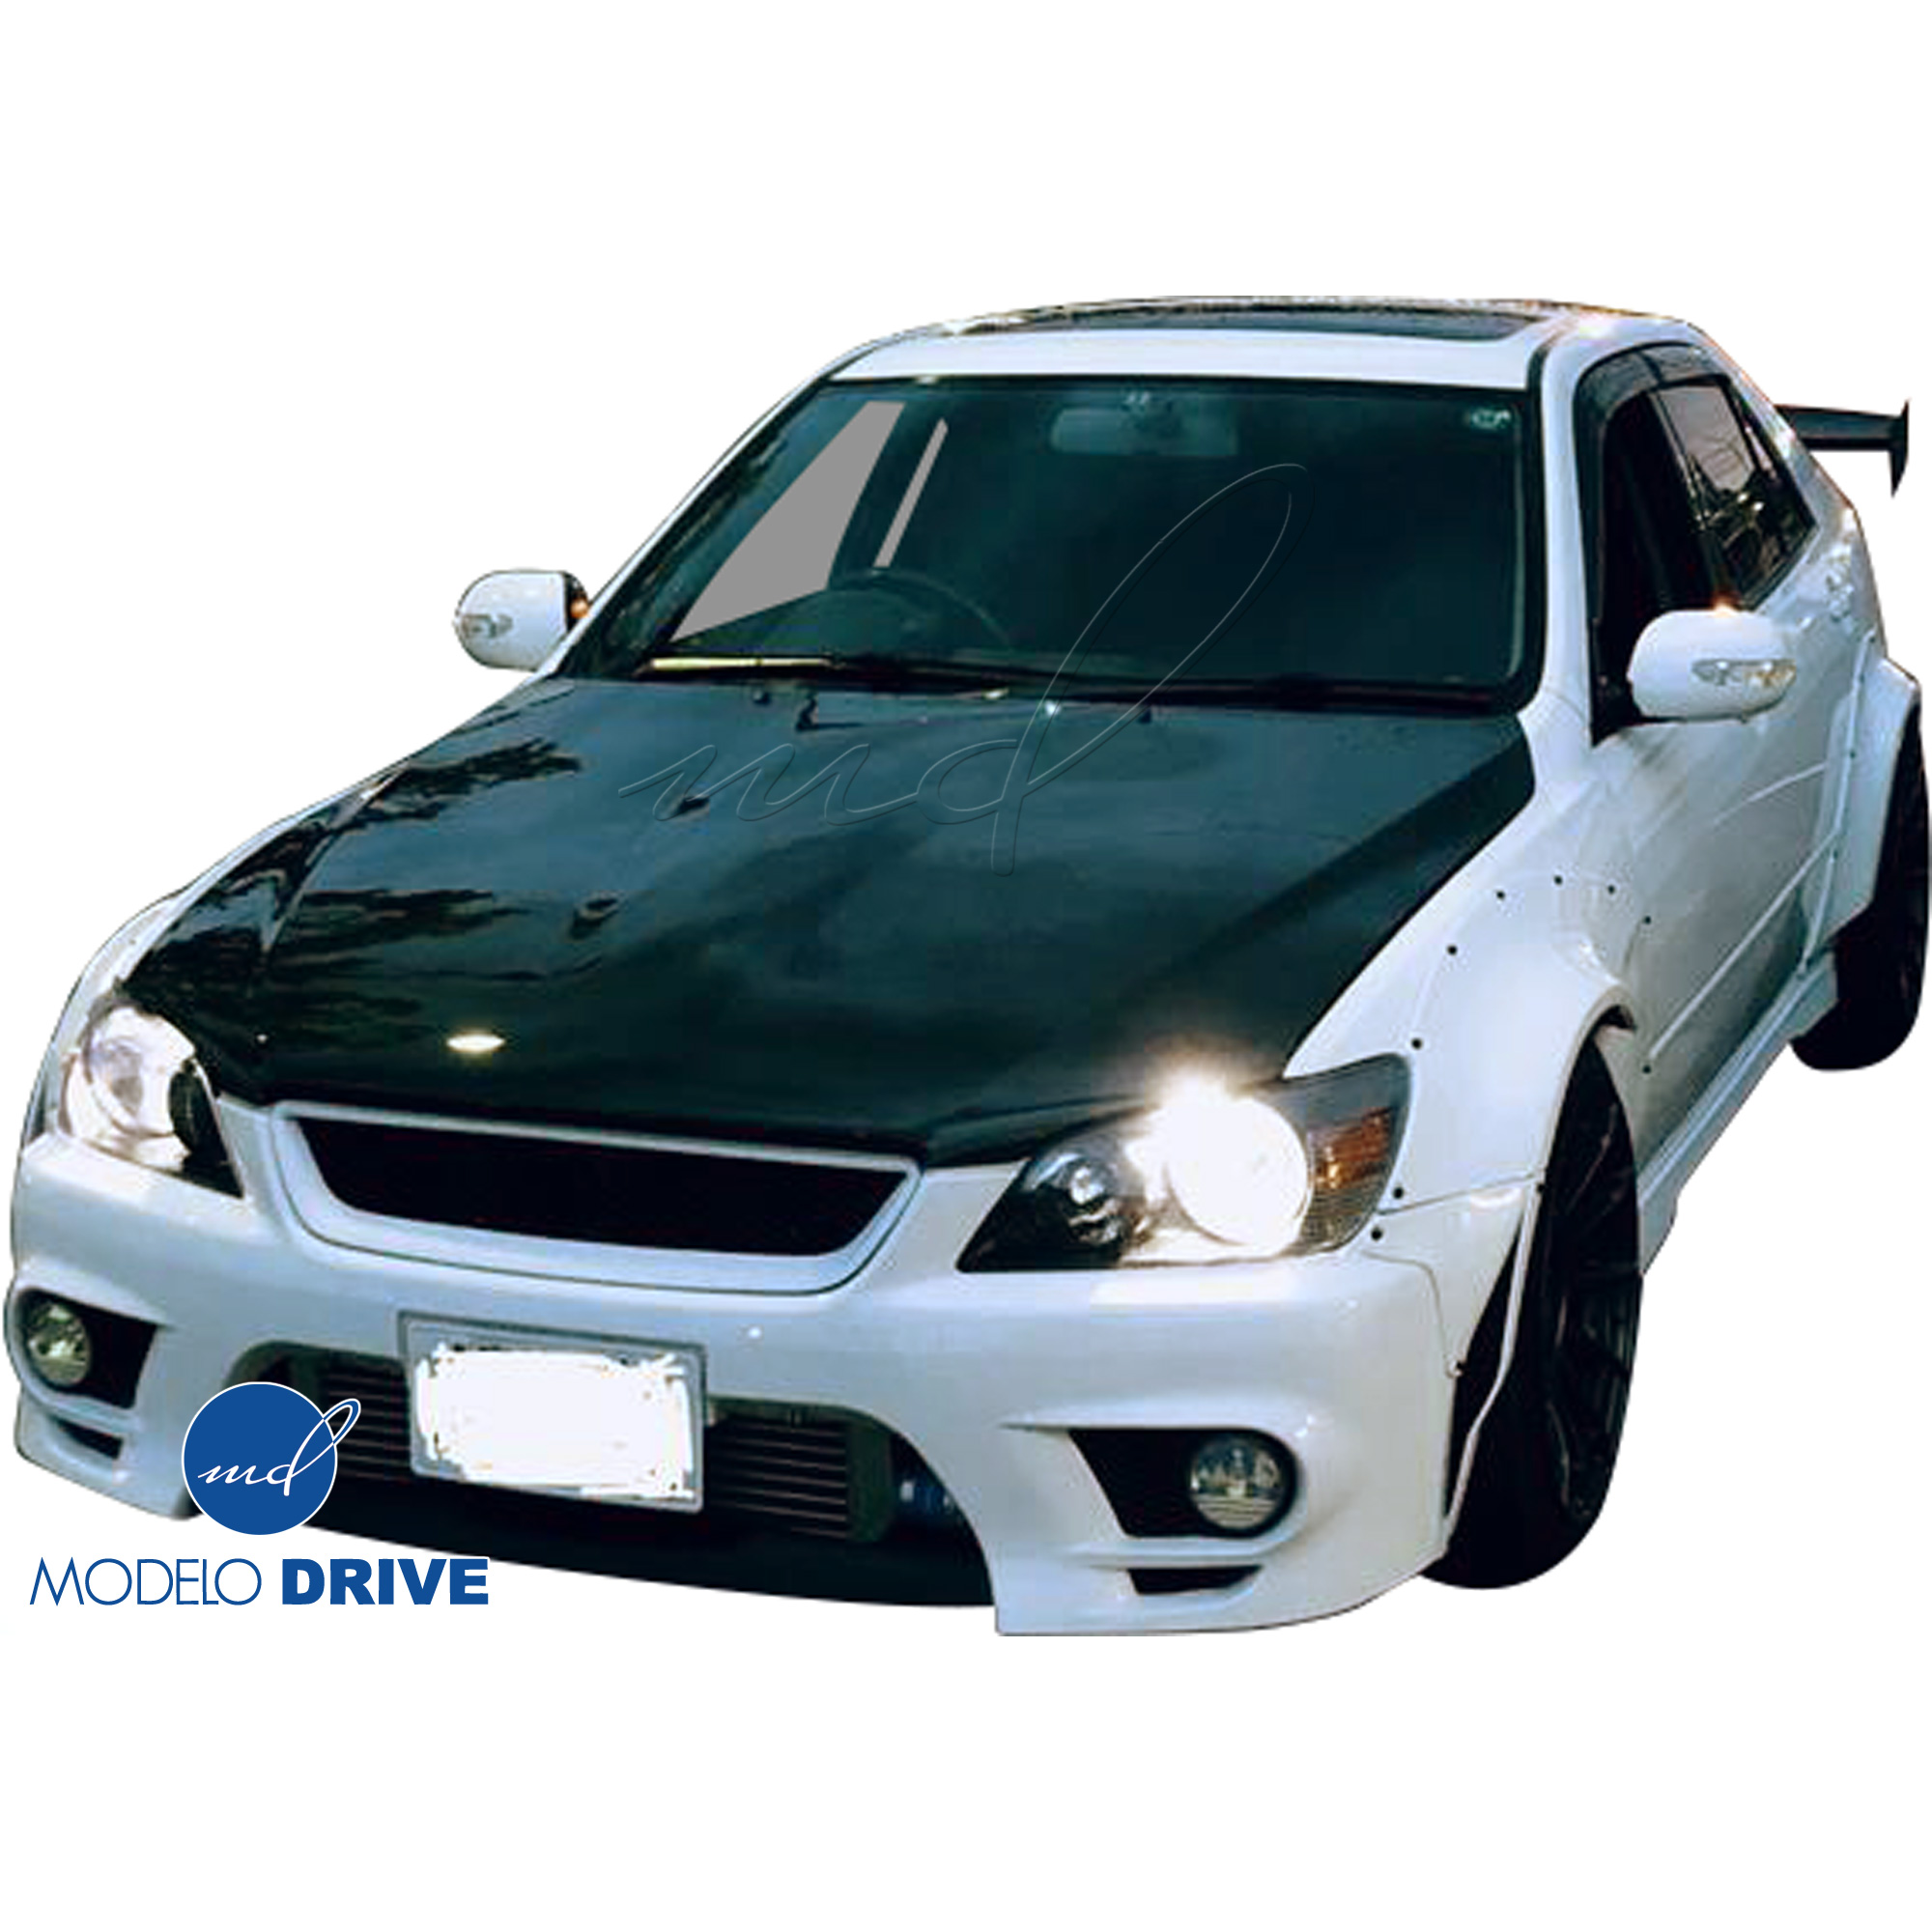 ModeloDrive FRP MSV Wide Body 40mm Fender Flares (front) 4pc > Lexus IS Series IS300 2000-2005> 4dr - Image 13